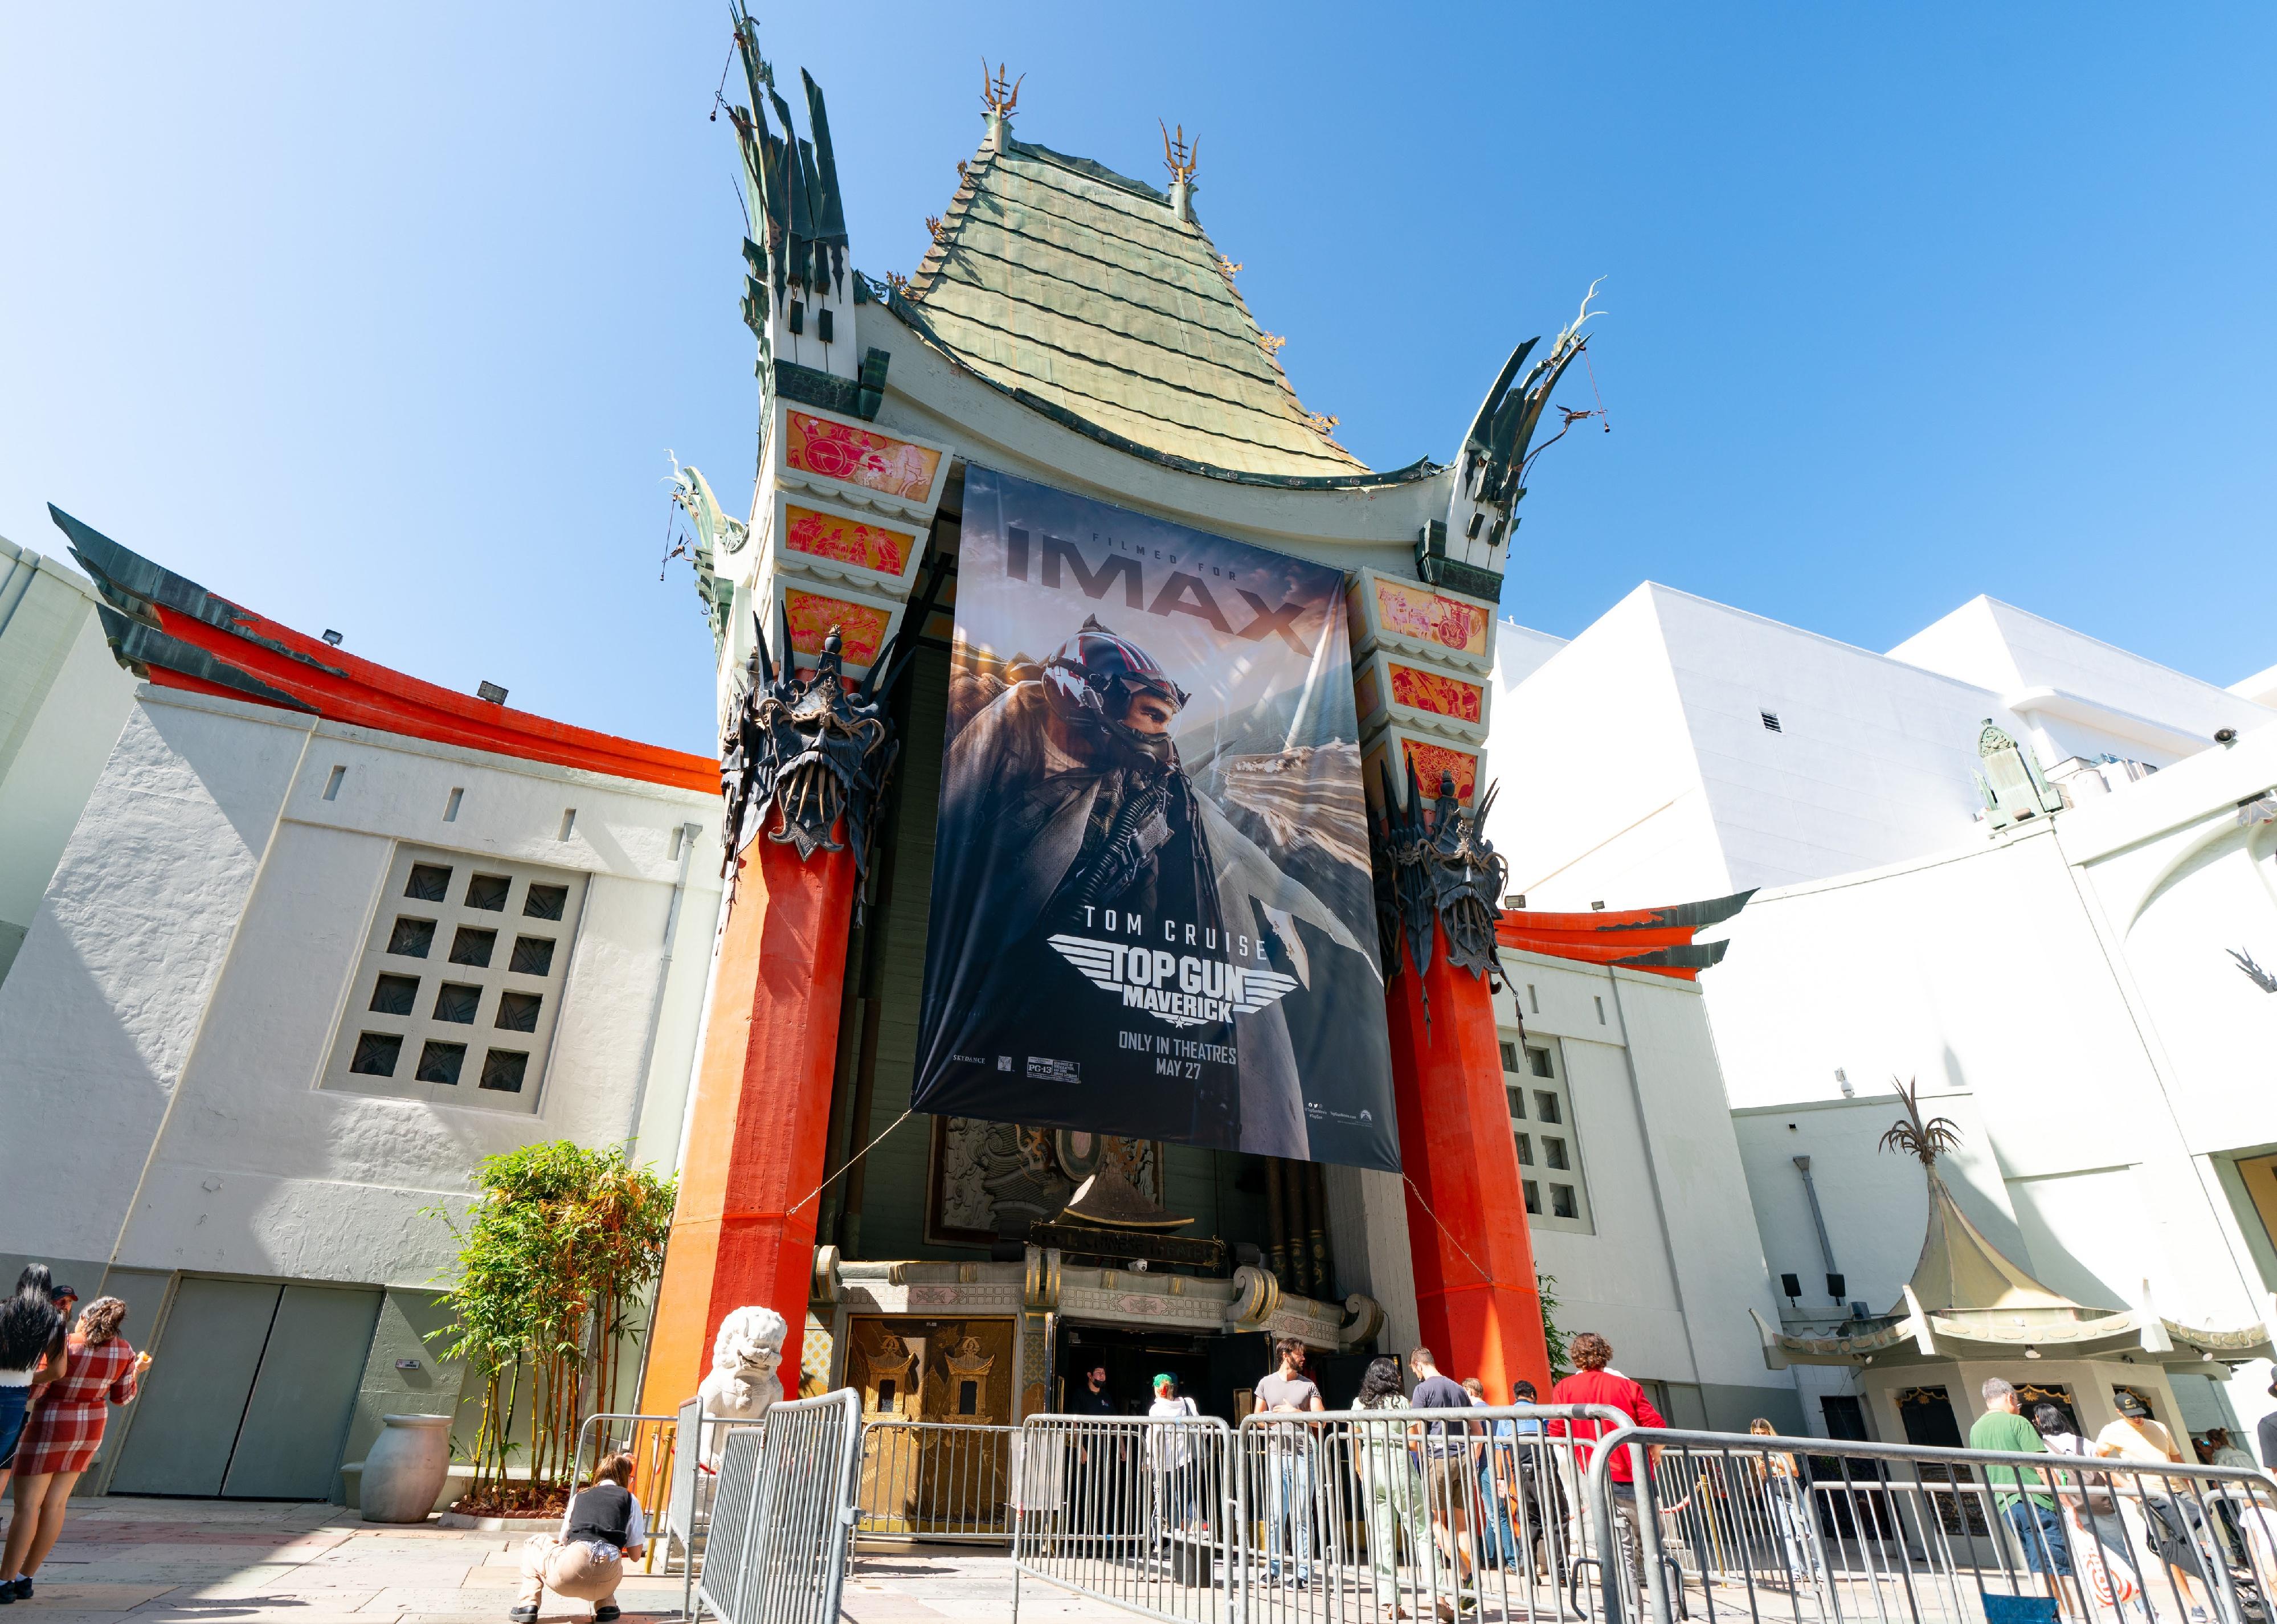 Outside view of the TCL Chinese Theatre promoting 